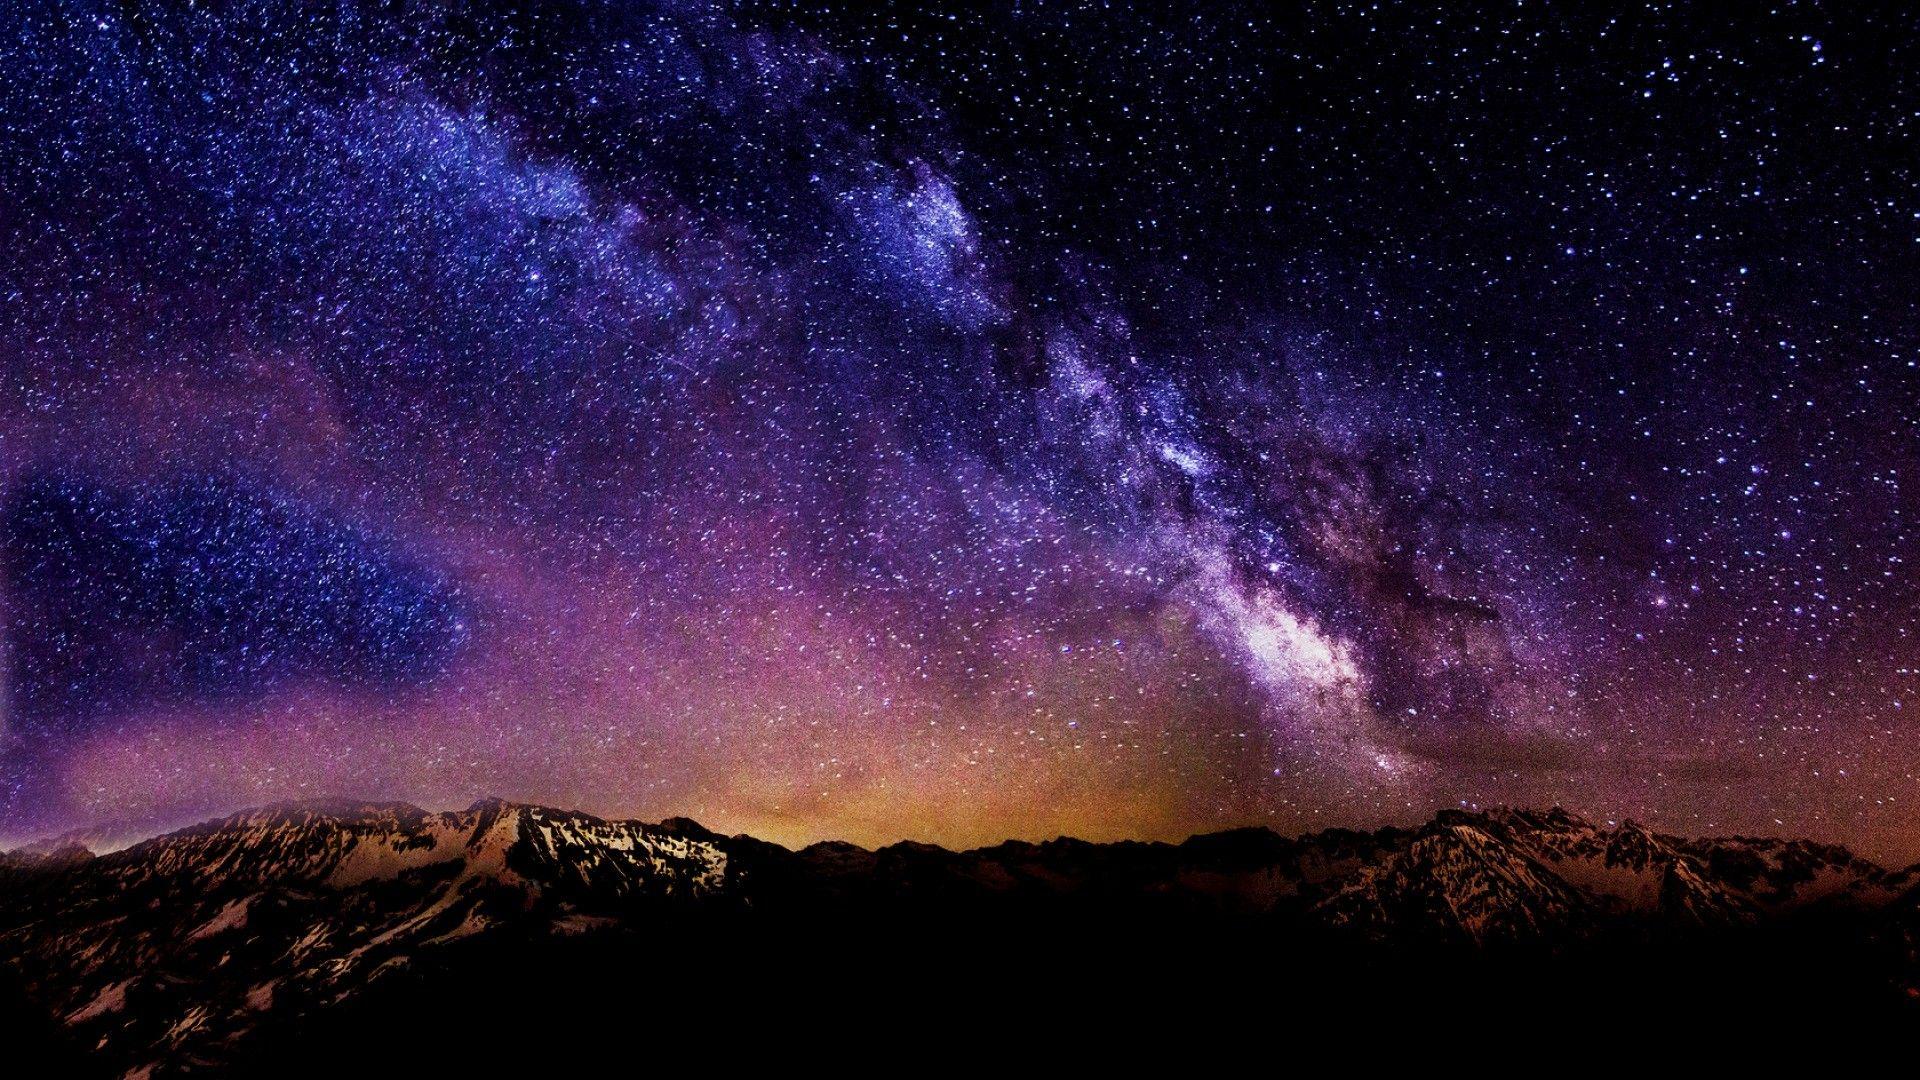 Get Lost in the Beauty of 500+ Desktop backgrounds night sky for Your Computer and Phone